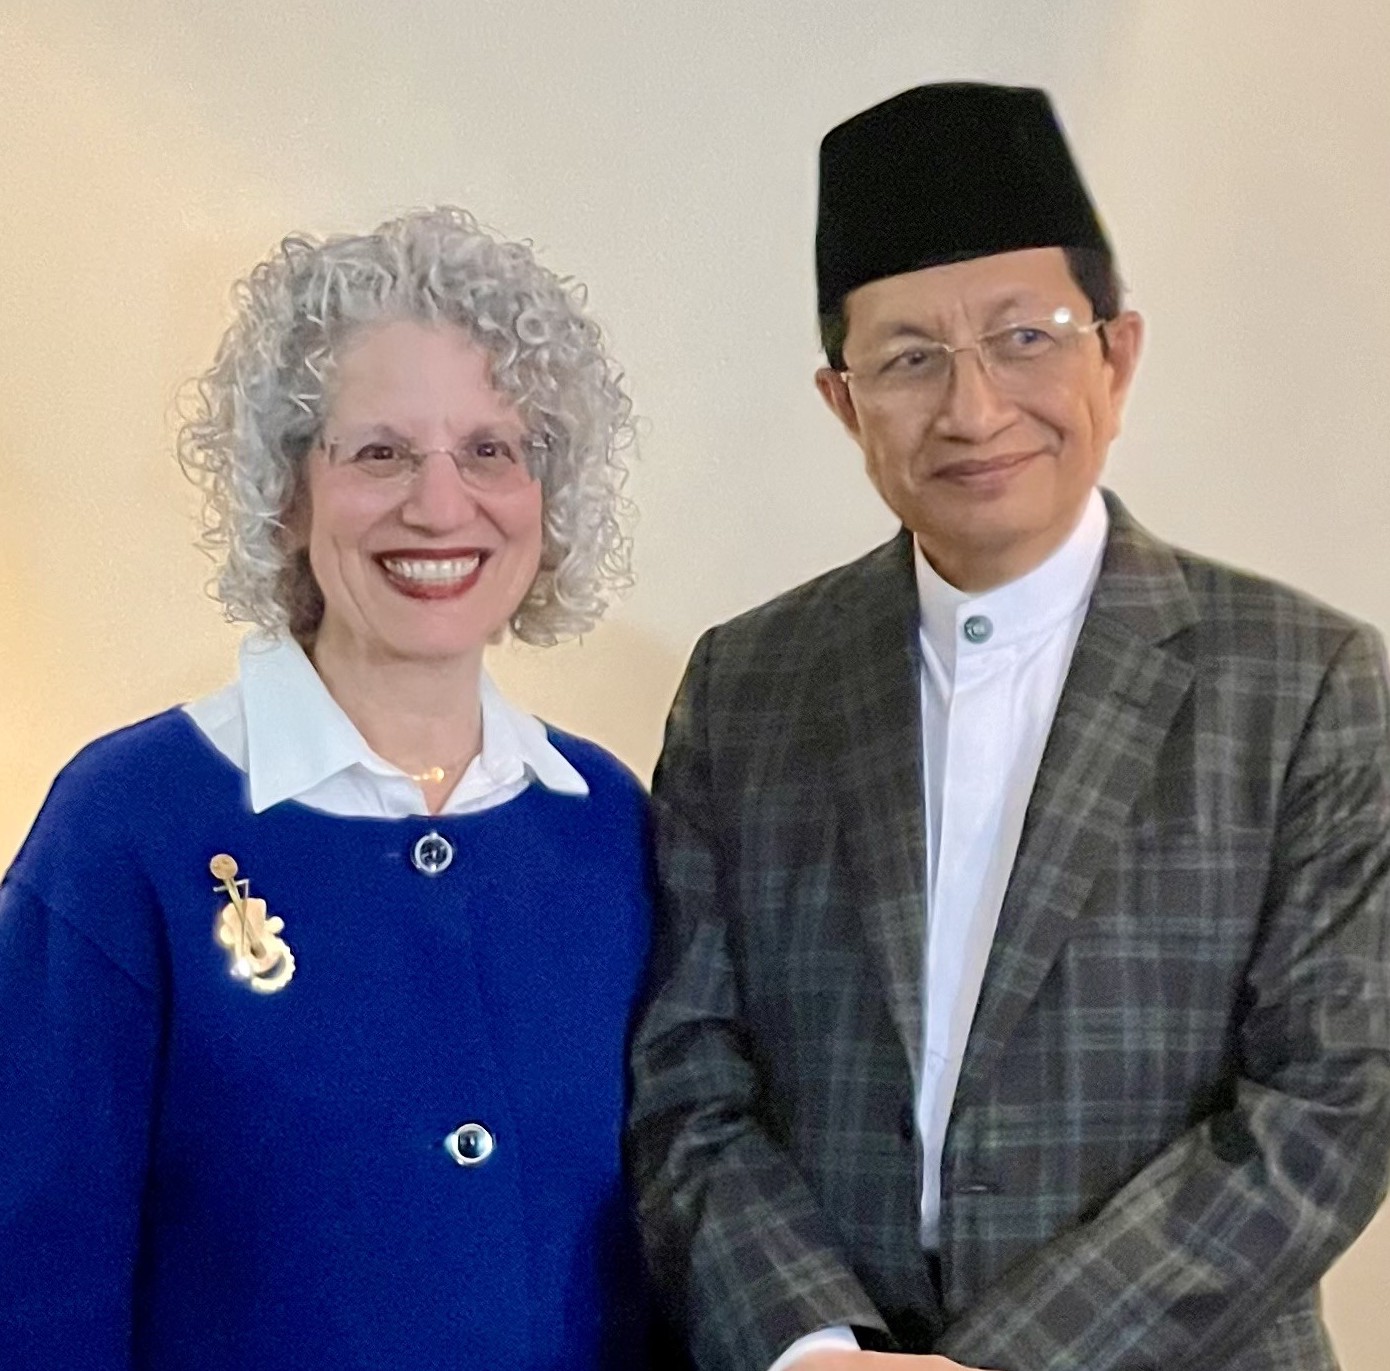 PROFESSOR NASARUDDIN UMAR, A RESPECTED INDONESIAN RELIGIOUS LEADER, COMPLETES FELLOWSHIP AT JTS 